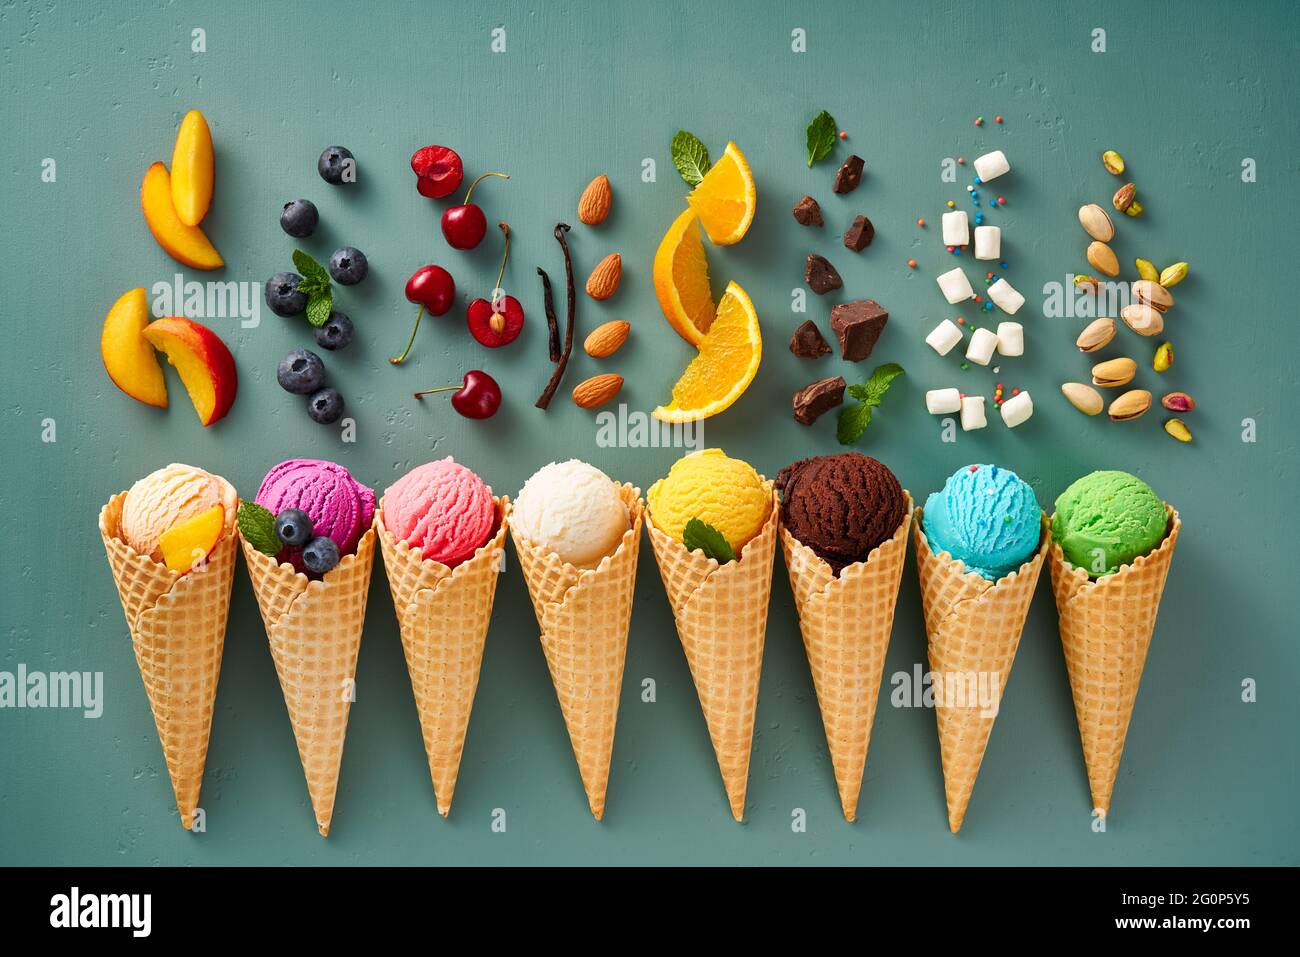 Assorted of ice cream in cones on blue background. Colorful set of ice cream of different flavours. Ice cream isolated with nuts, fruits and berries. Stock Photo